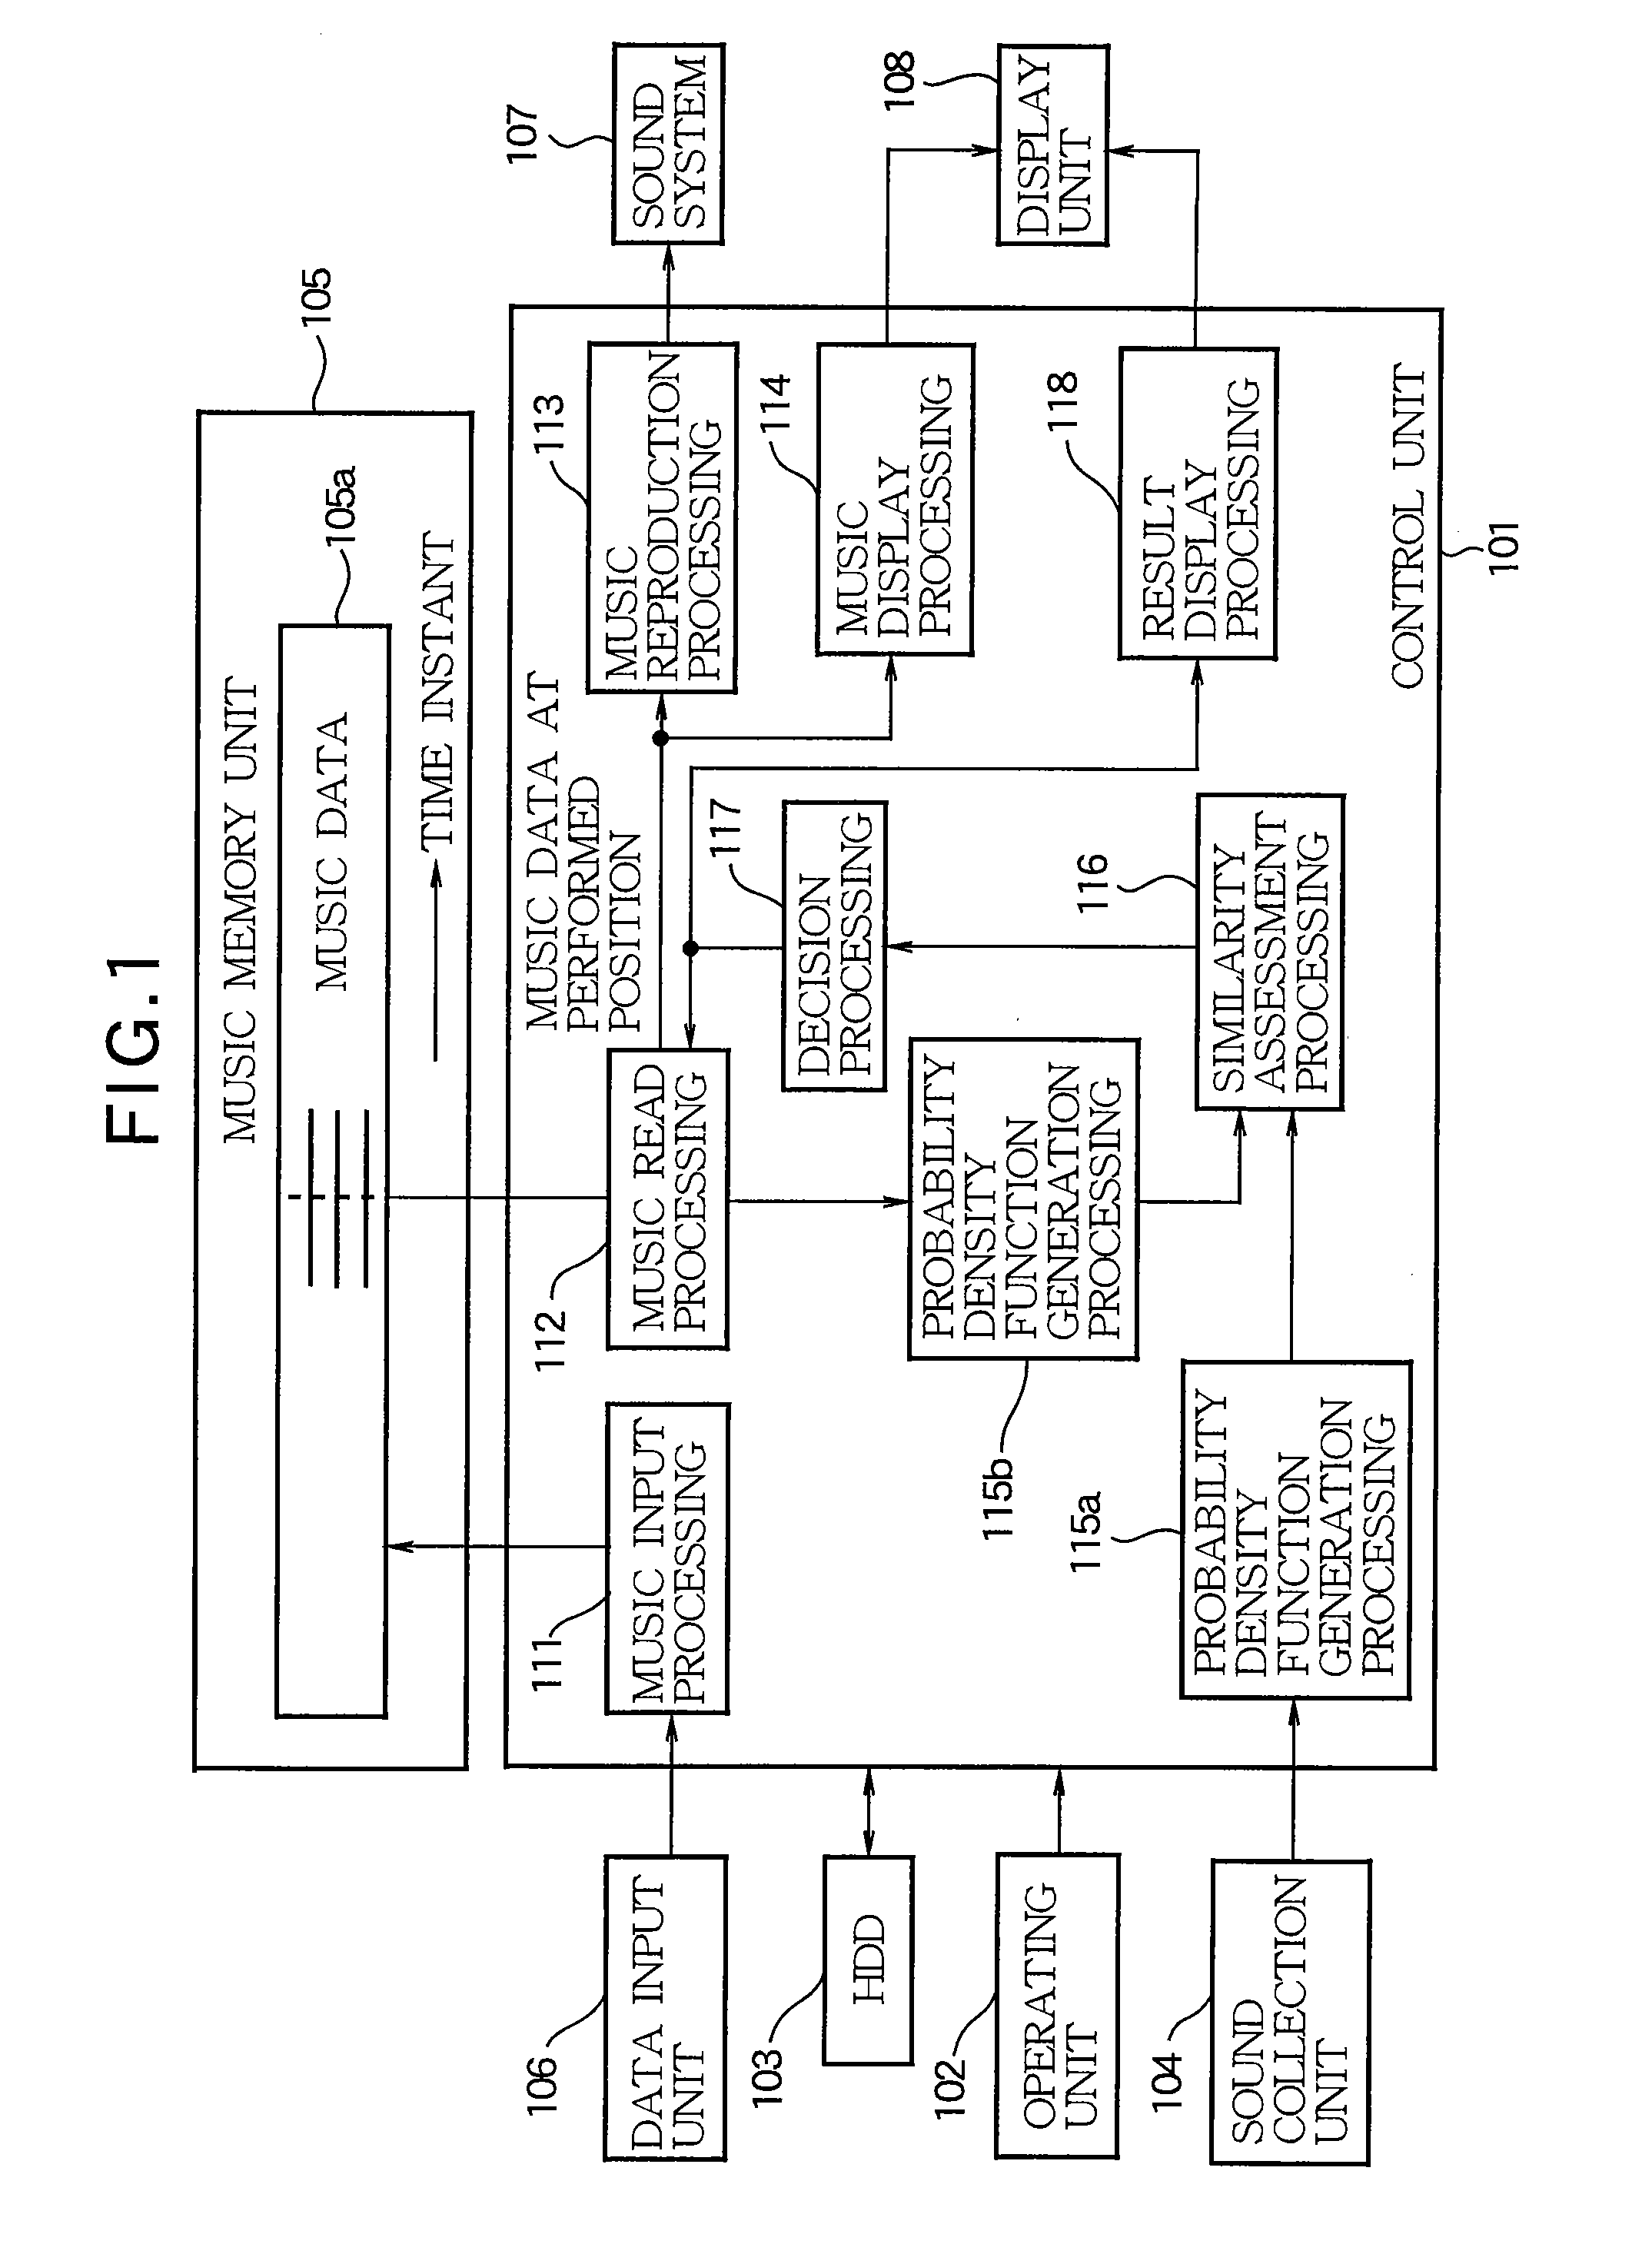 Method, Apparatus, and Program for Assessing Similarity of Performance Sound